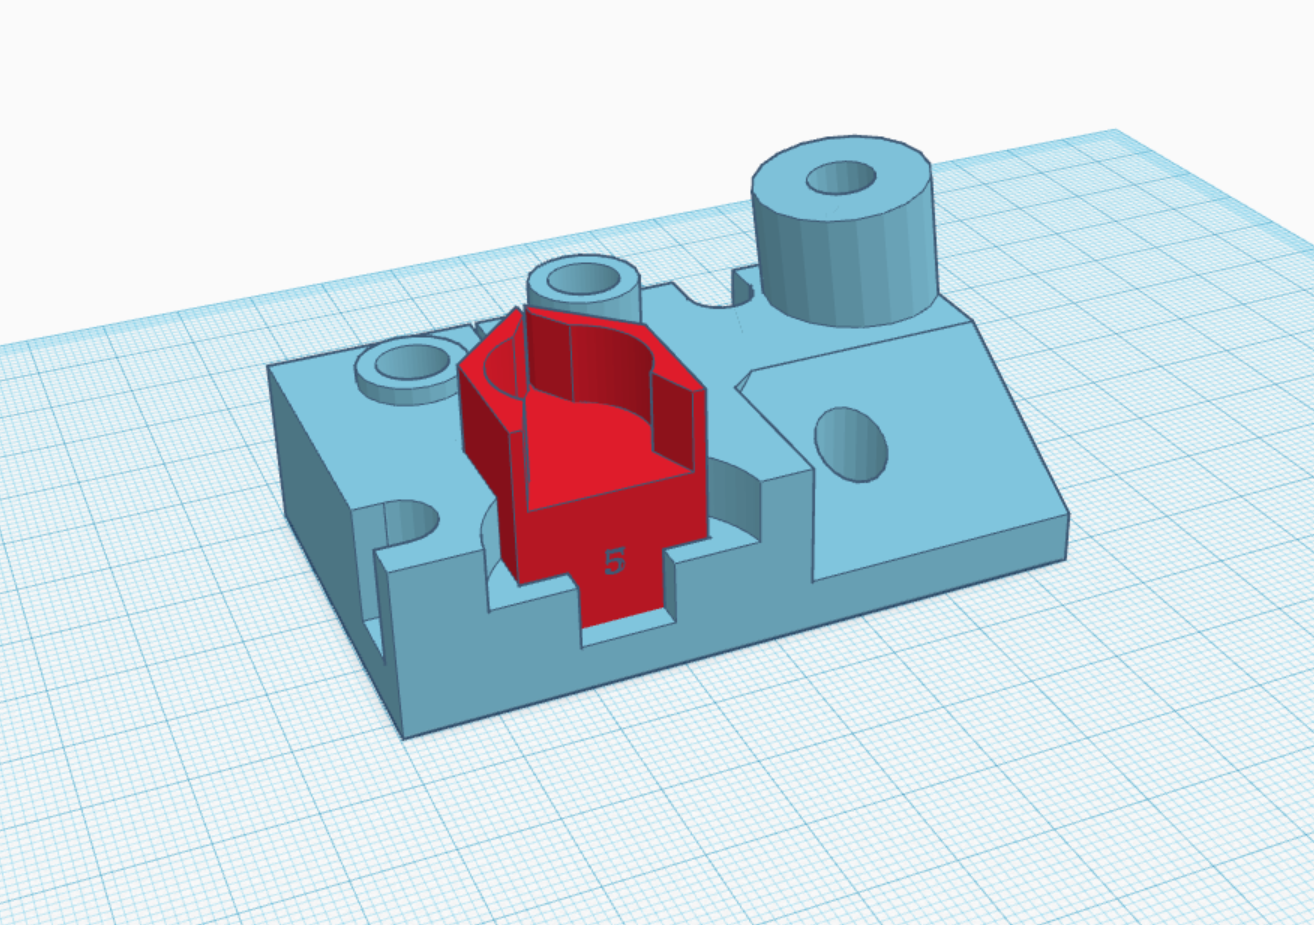 WIP : PET bottle strip cutter for recycle them to 3Dprinter filament